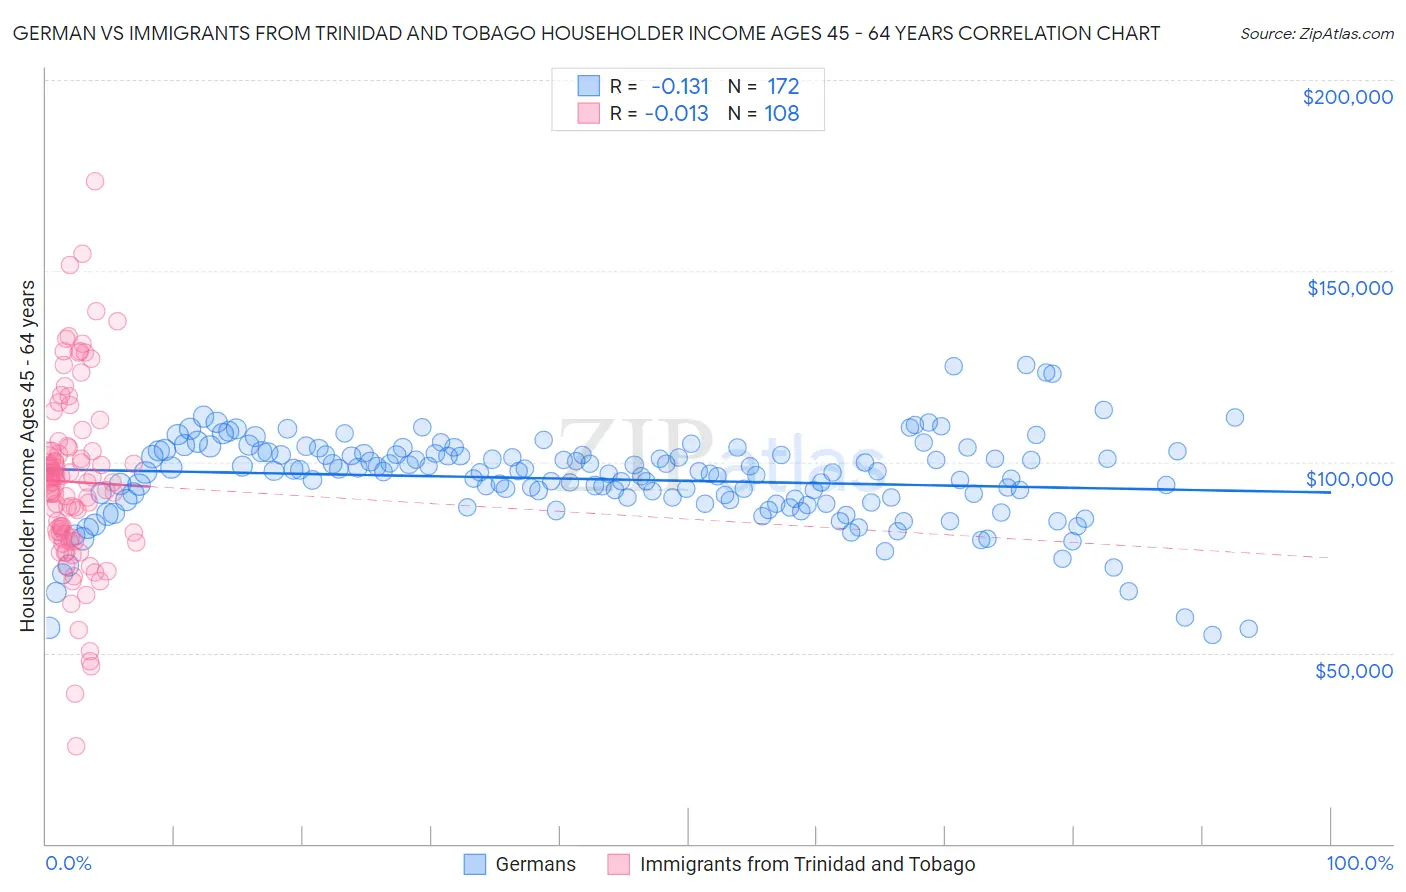 German vs Immigrants from Trinidad and Tobago Householder Income Ages 45 - 64 years